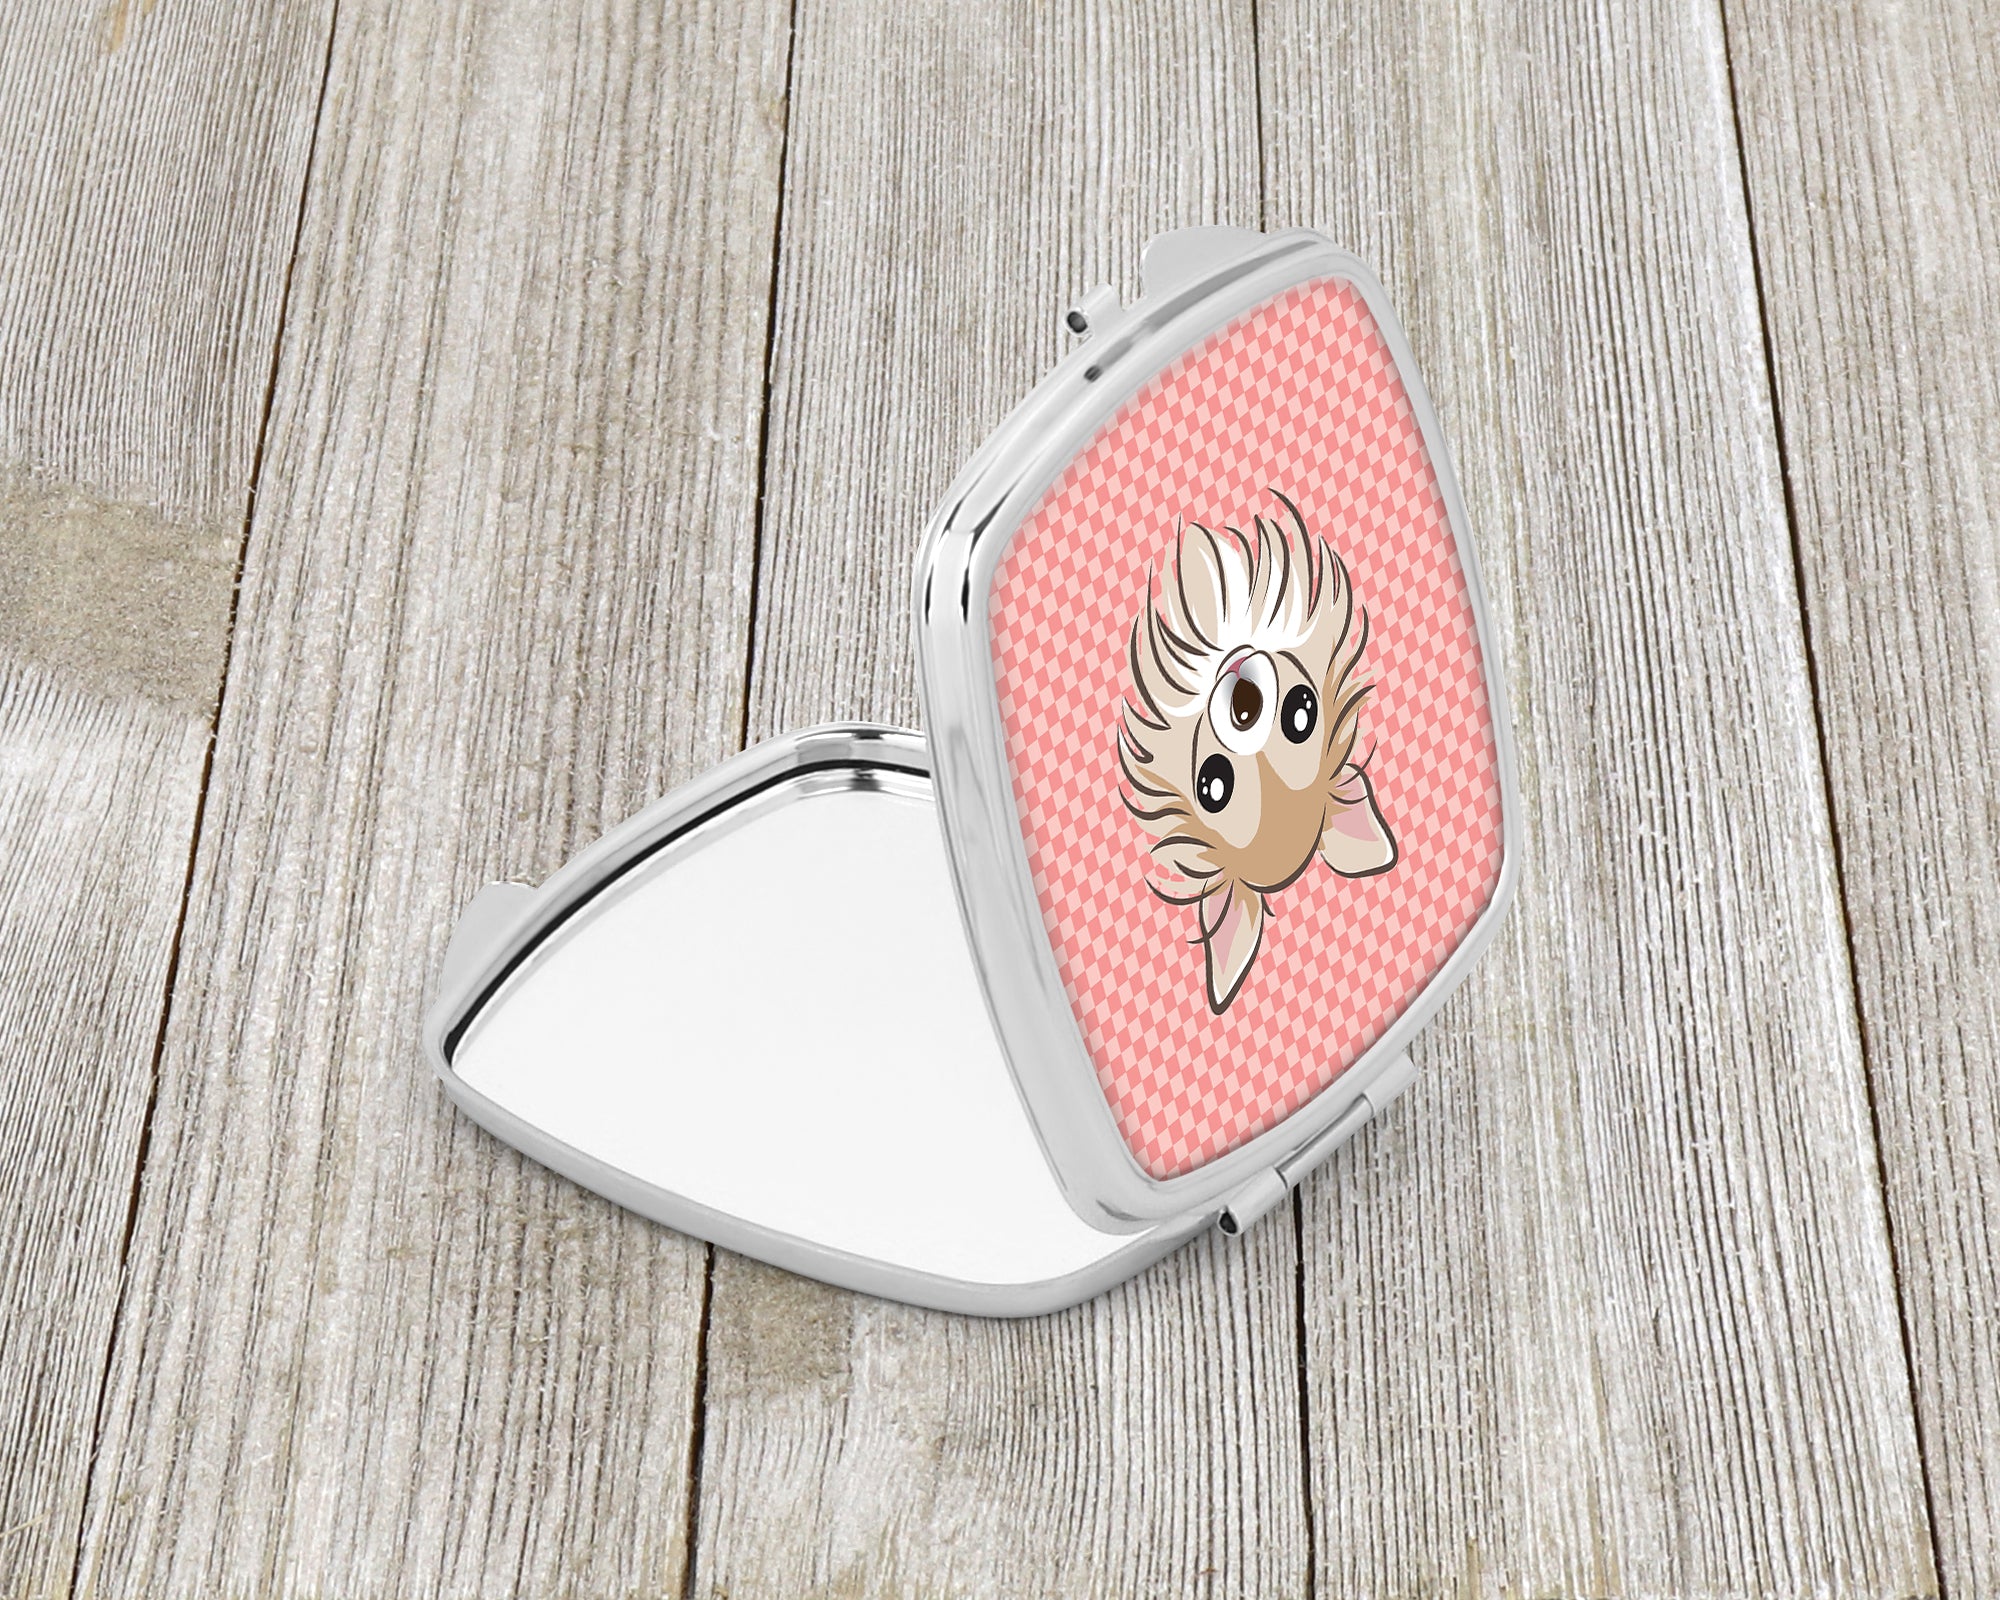 Checkerboard Pink Chihuahua Compact Mirror BB1251SCM  the-store.com.